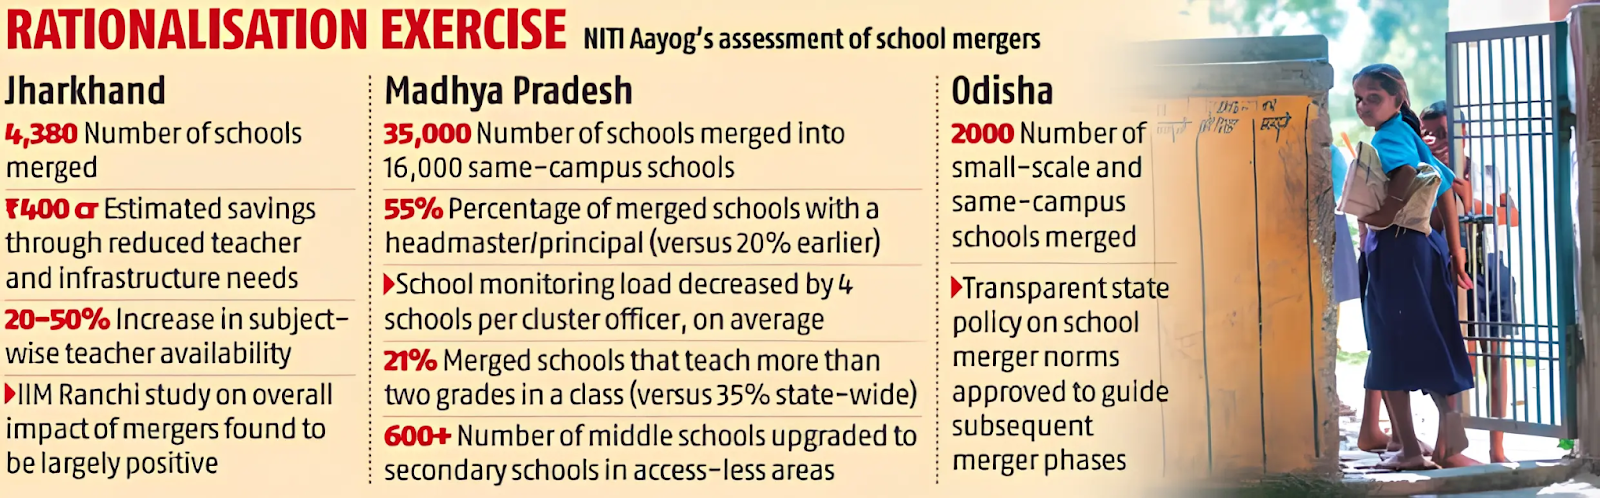 Report on Learnings for Large-Scale Transformation in School Education | NITI Aayog Report | UPSC